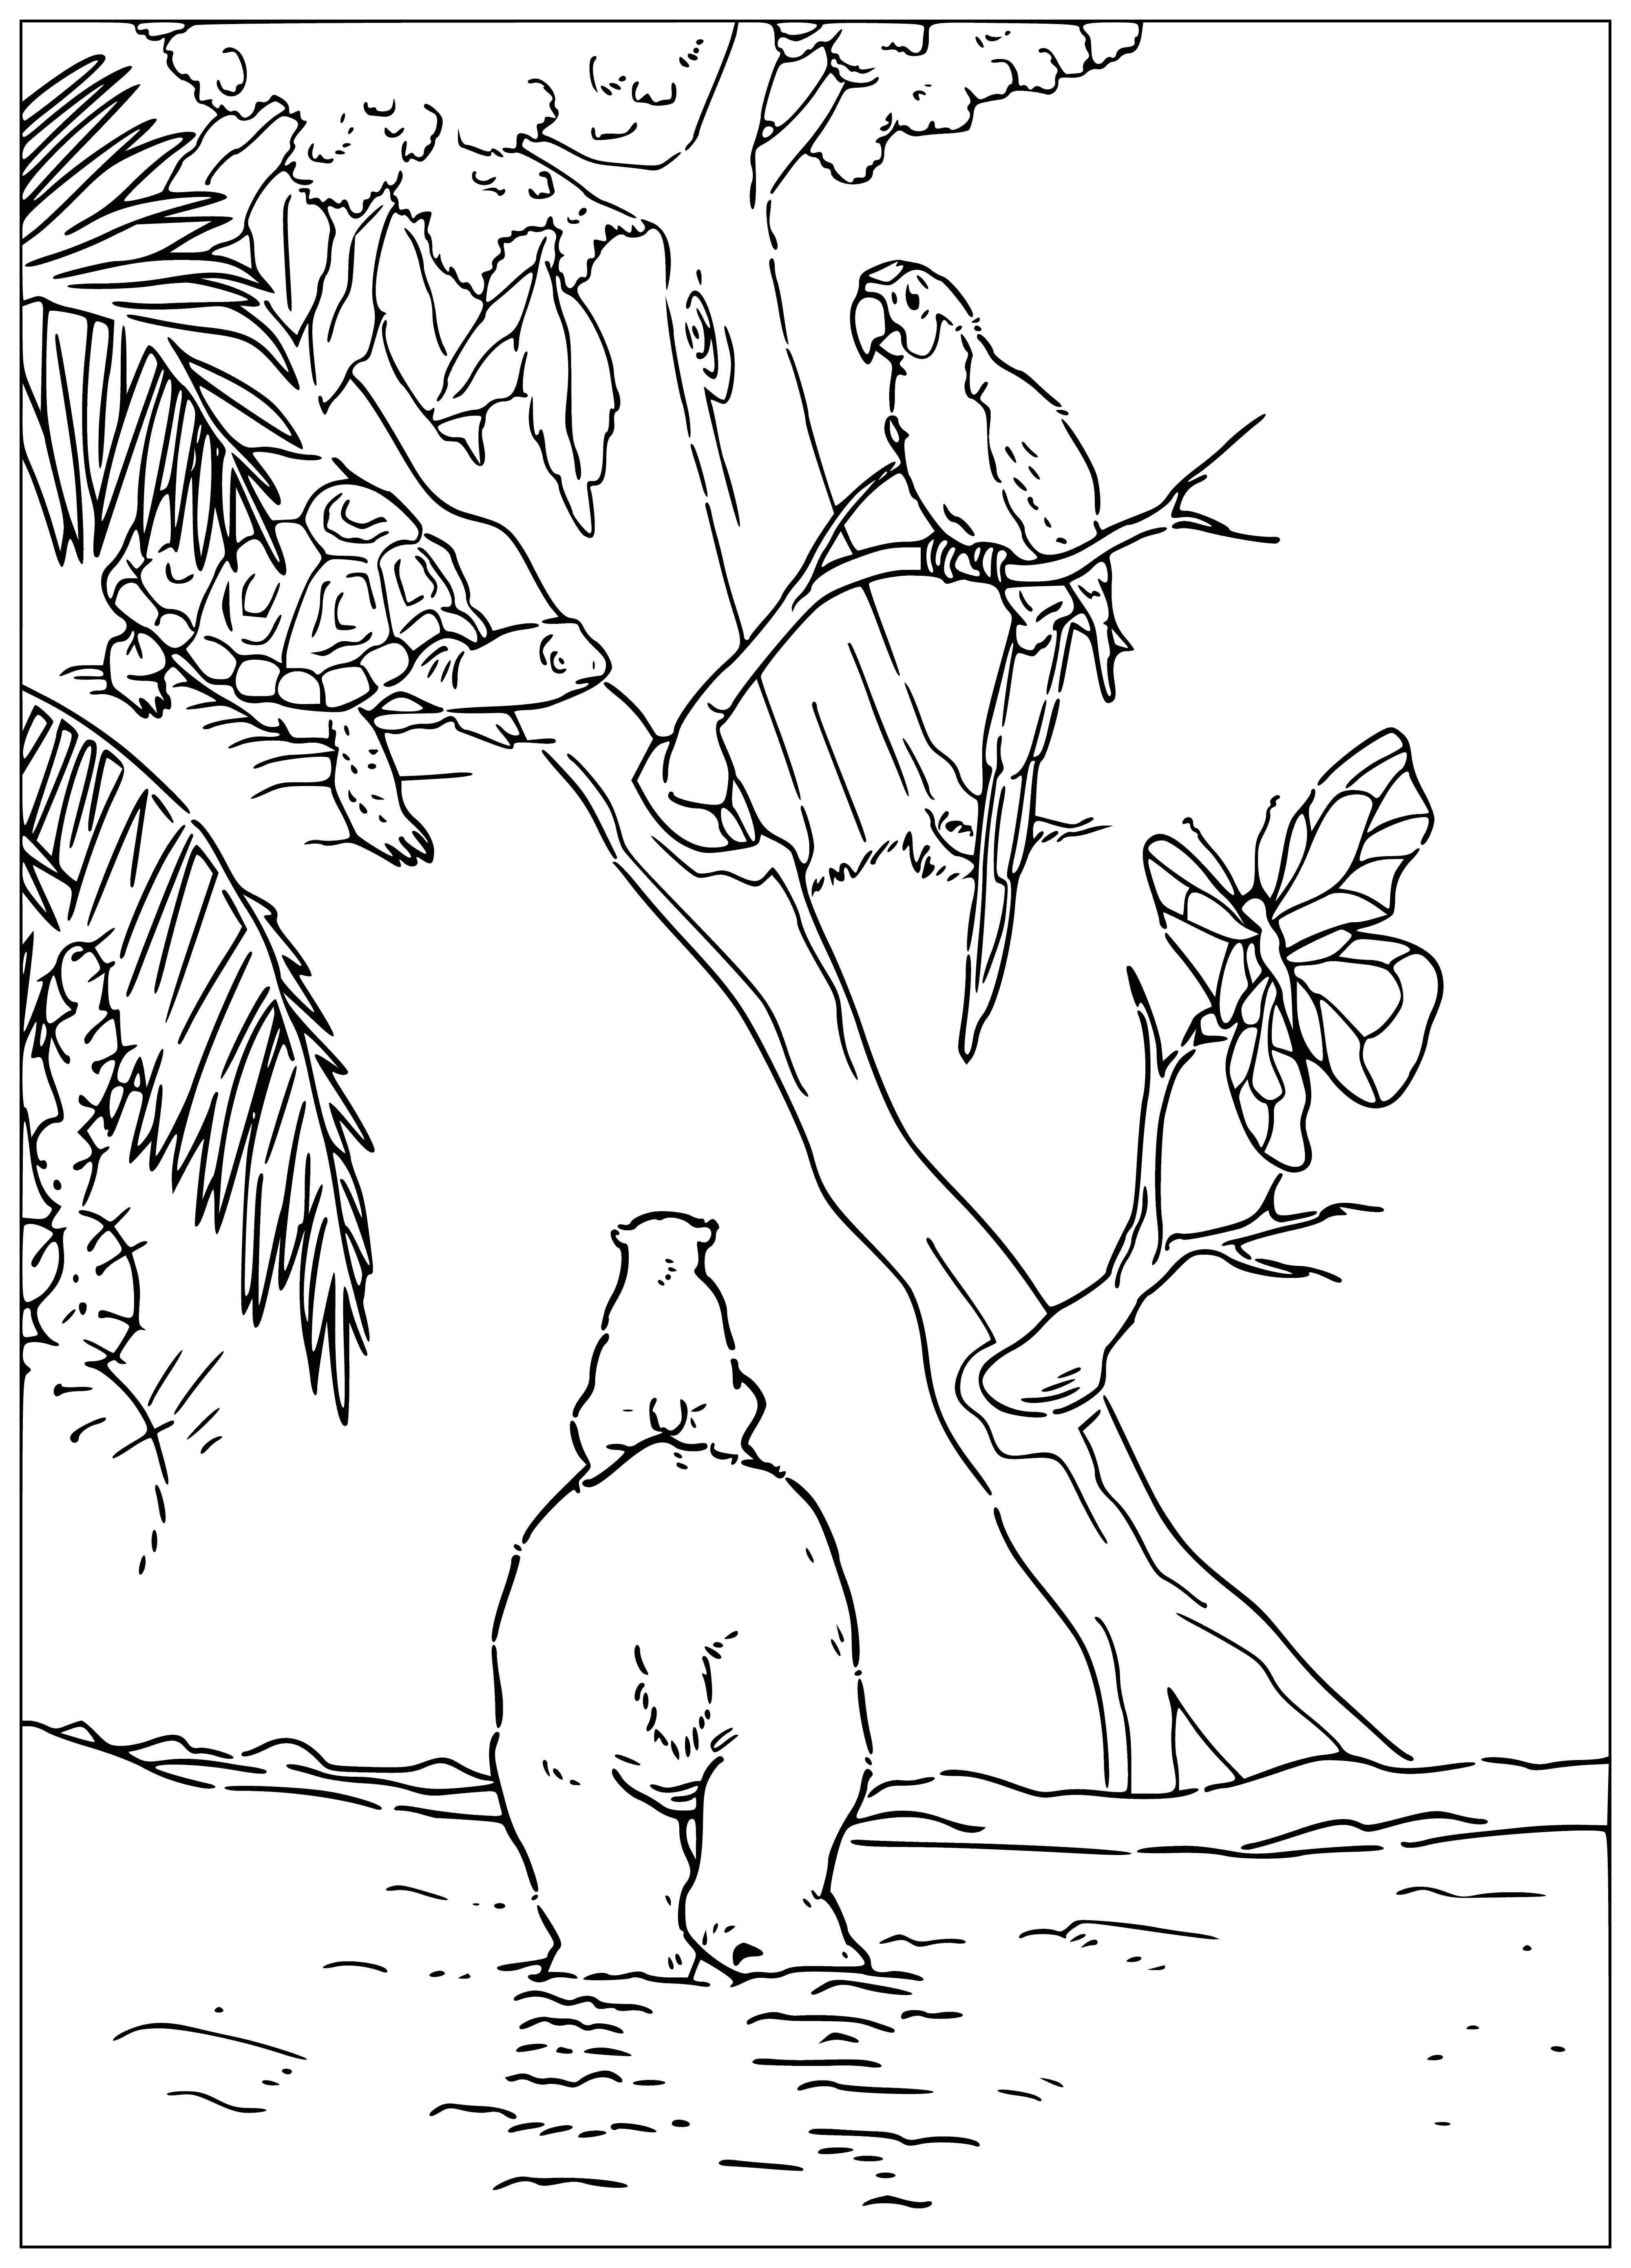 Lars in the tropics coloring page